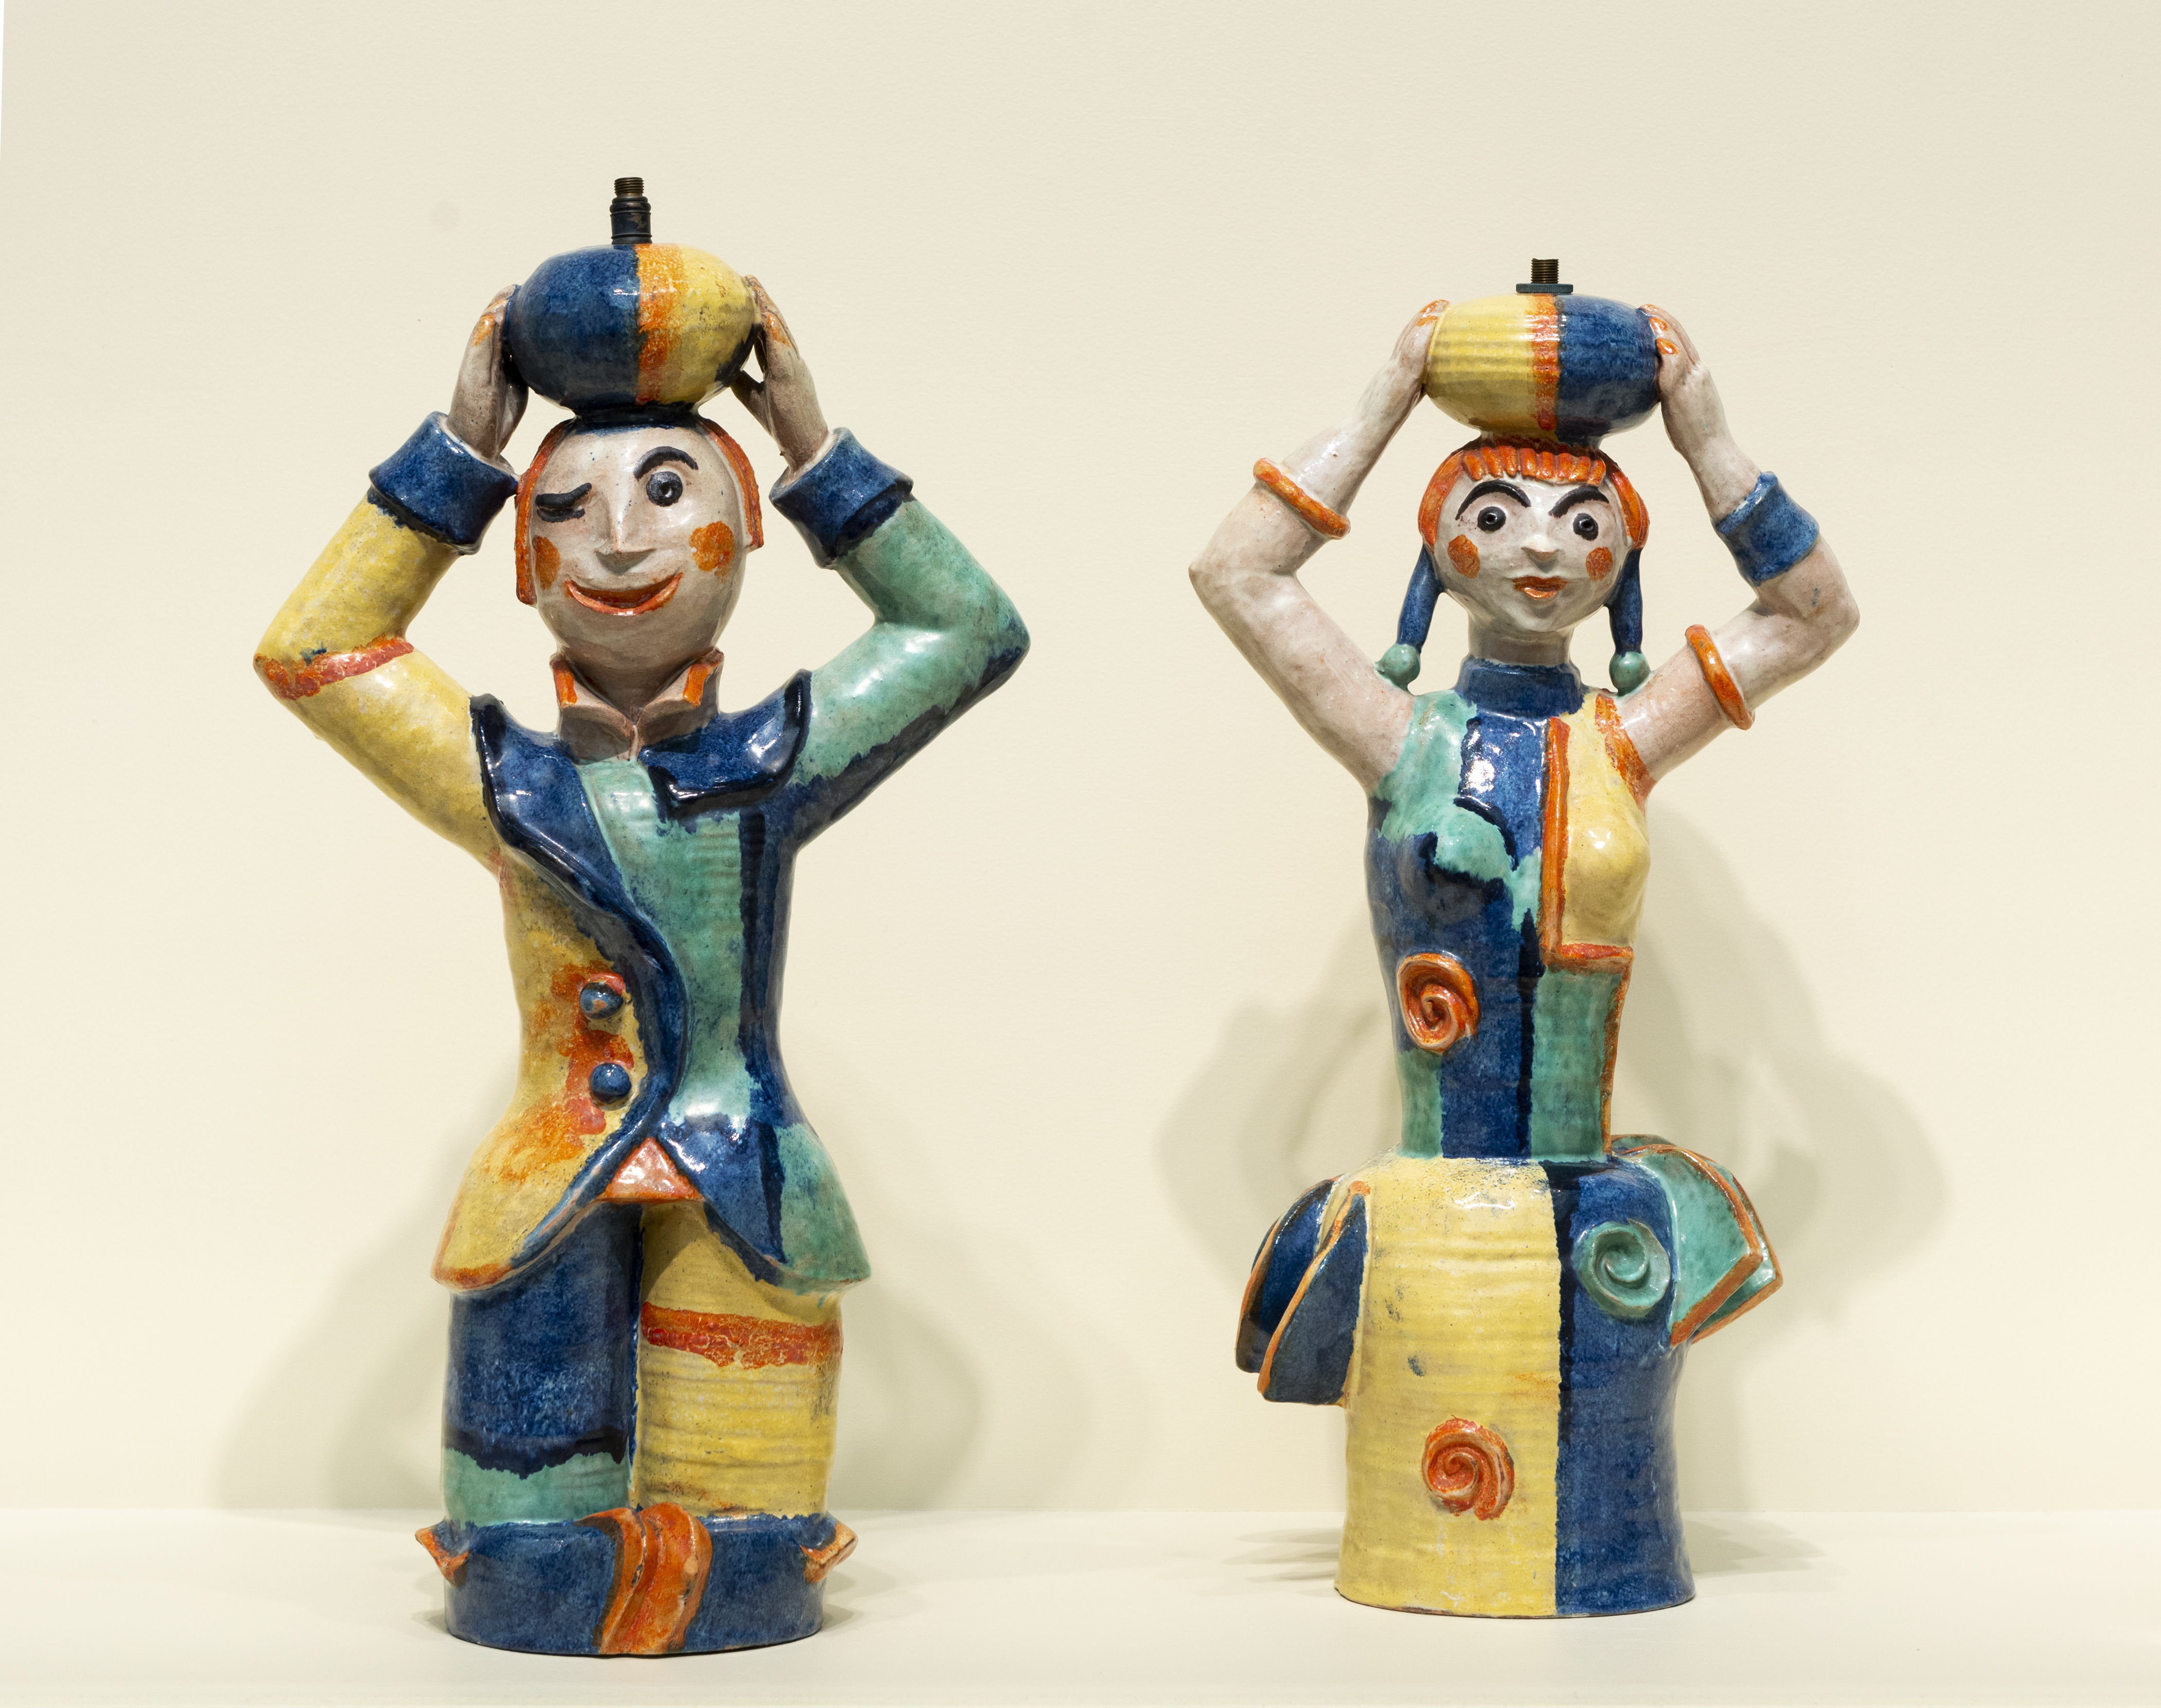 glazed lamp bases sculpted in the form of a boy and a girl wearing colorful clothing and holding baskets on their heads